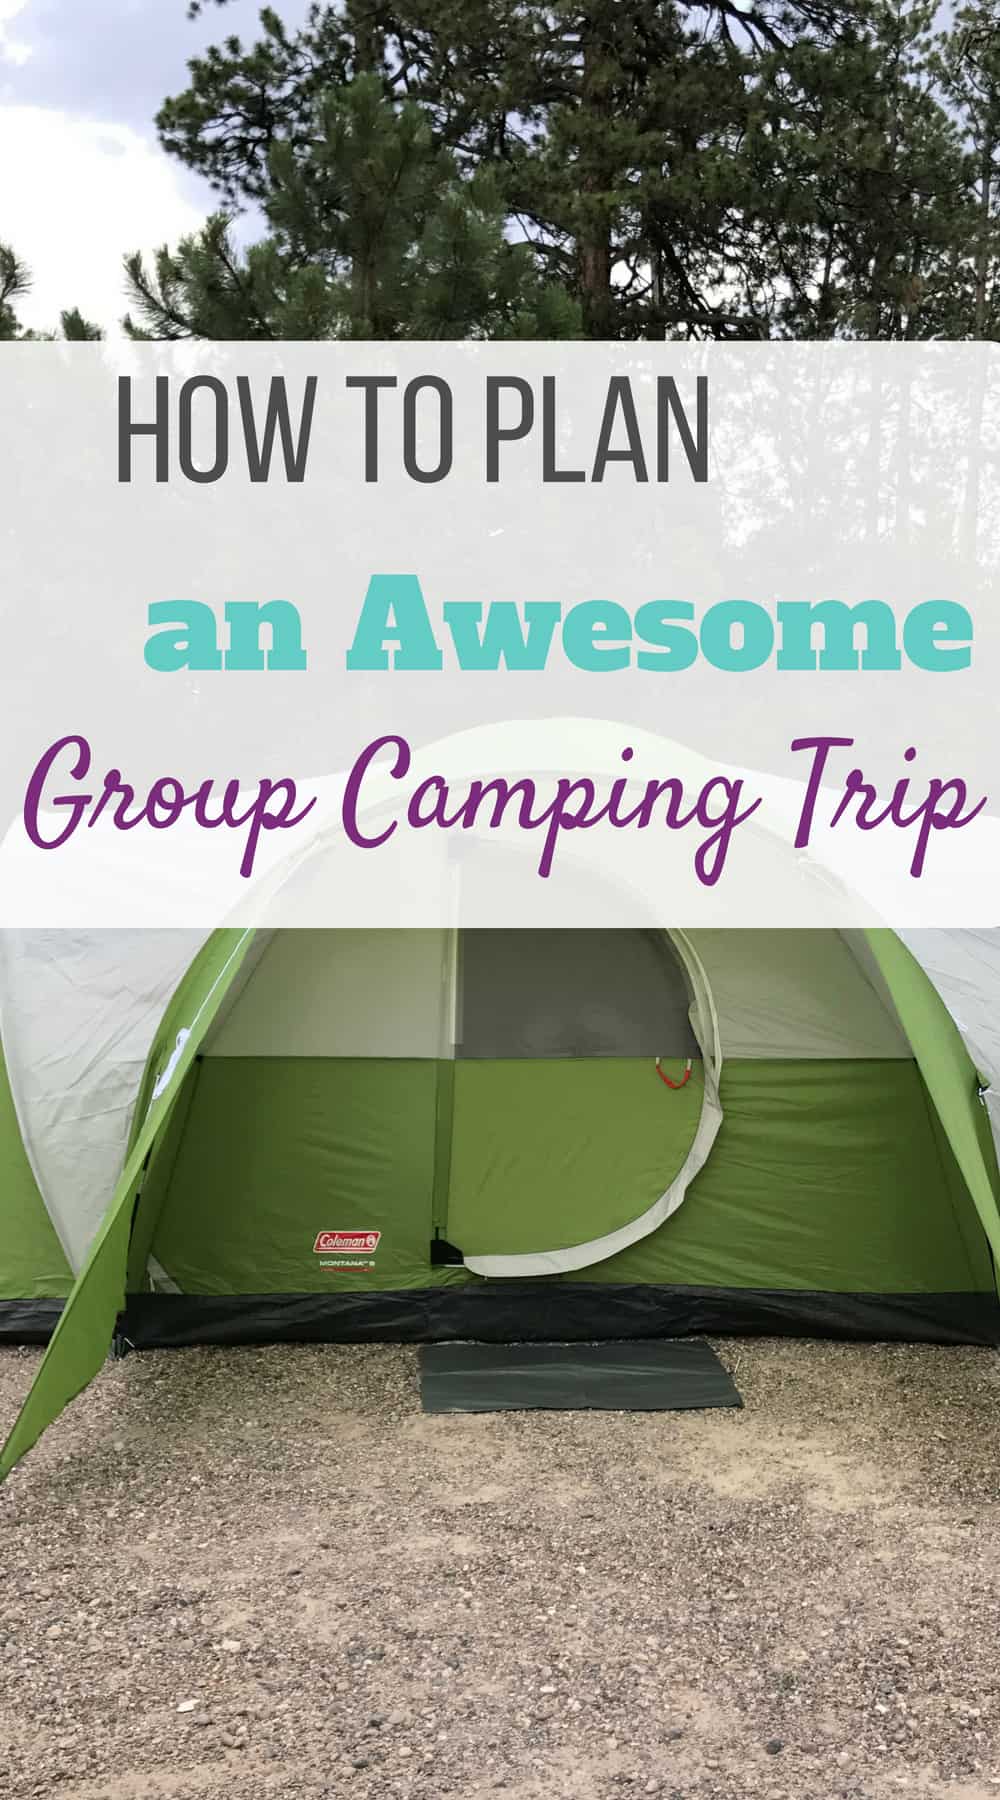 How to Plan an Awesome Group Camping Trip, group camping tips, planning a group camping trip, camping with friends, group camping trips, how to plan a group camping trip, group camping ideas, camping checklist, how to plan a camping trip, group camping meals, camping organization #groupcamp #groupcamping #campingwithfriends #campingtips #campingmeals #campingfood